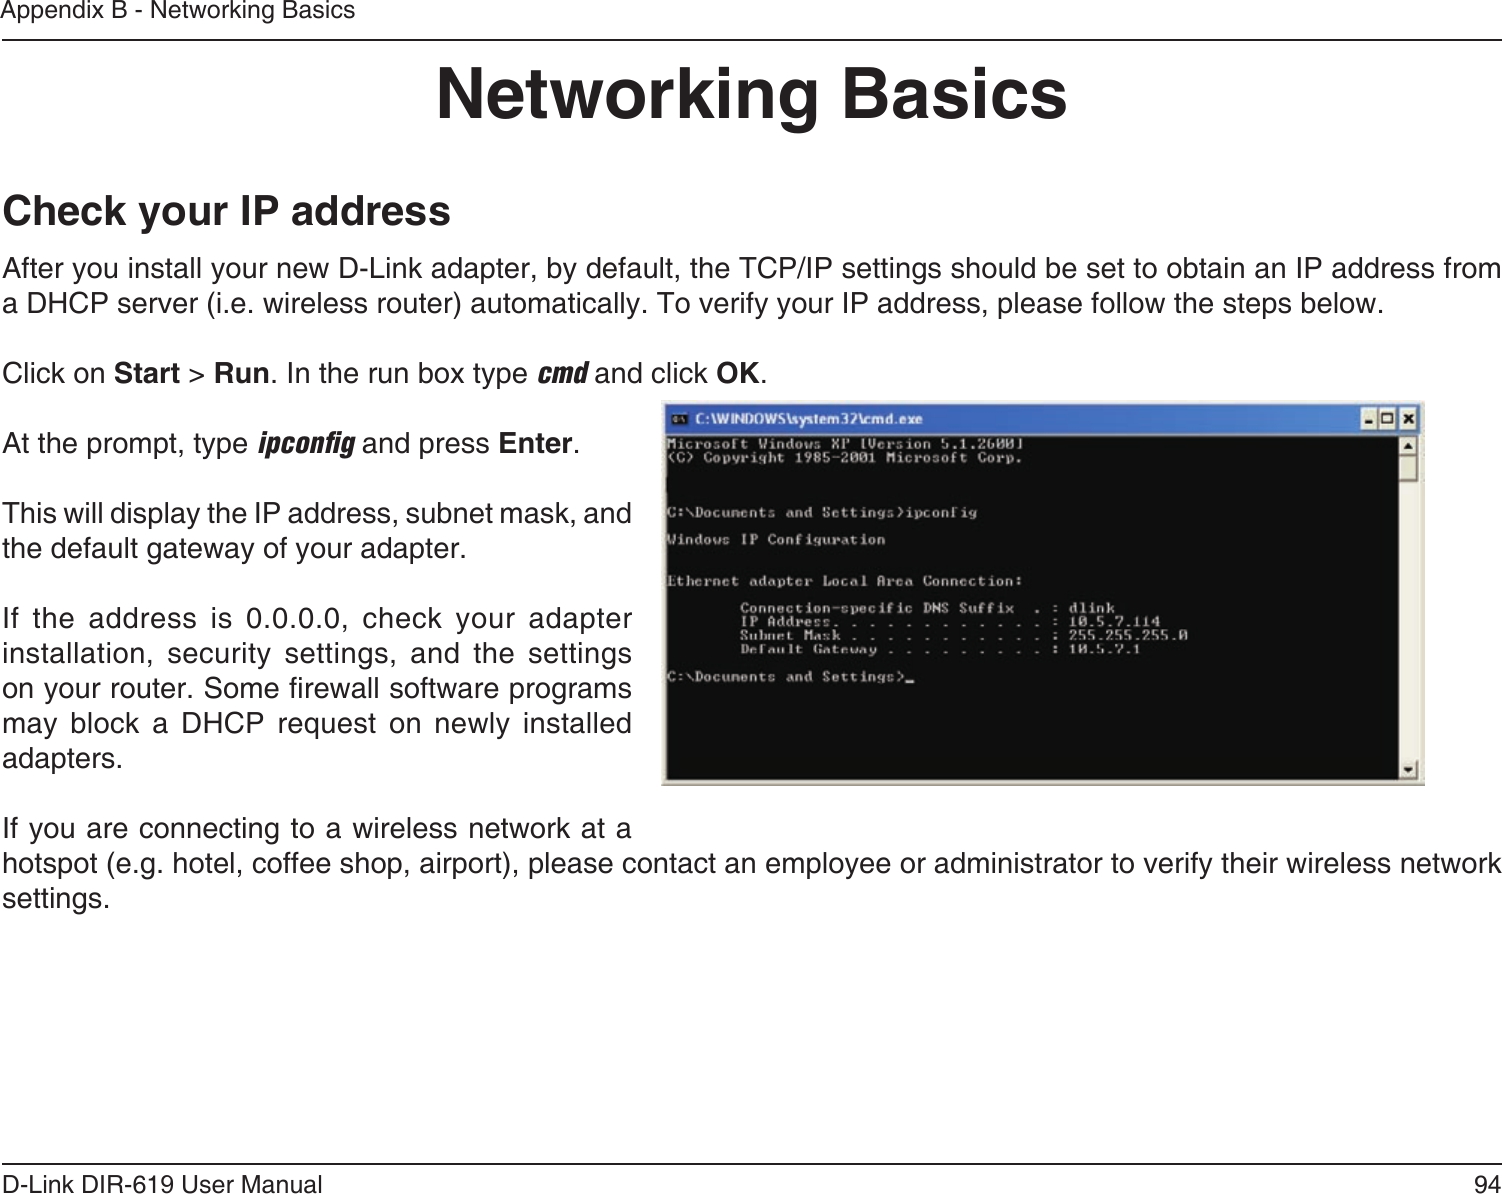 94D-Link DIR-619 User ManualAppendix B - Networking BasicsNetworking BasicsCheck your IP addressAfter you install your new D-Link adapter, by default, the TCP/IP settings should be set to obtain an IP address from a DHCP server (i.e. wireless router) automatically. To verify your IP address, please follow the steps below.Click on Start &gt; Run. In the run box type cmd and click OK.At the prompt, type ipconﬁg and press Enter.This will display the IP address, subnet mask, and the default gateway of your adapter.If the address is 0.0.0.0, check your adapter installation, security settings, and the settings on your router. Some rewall software programs may  block  a  DHCP  request  on  newly  installedadapters. If you are connecting to a wireless network at a hotspot (e.g. hotel, coffee shop, airport), please contact an employee or administrator to verify their wireless network settings.